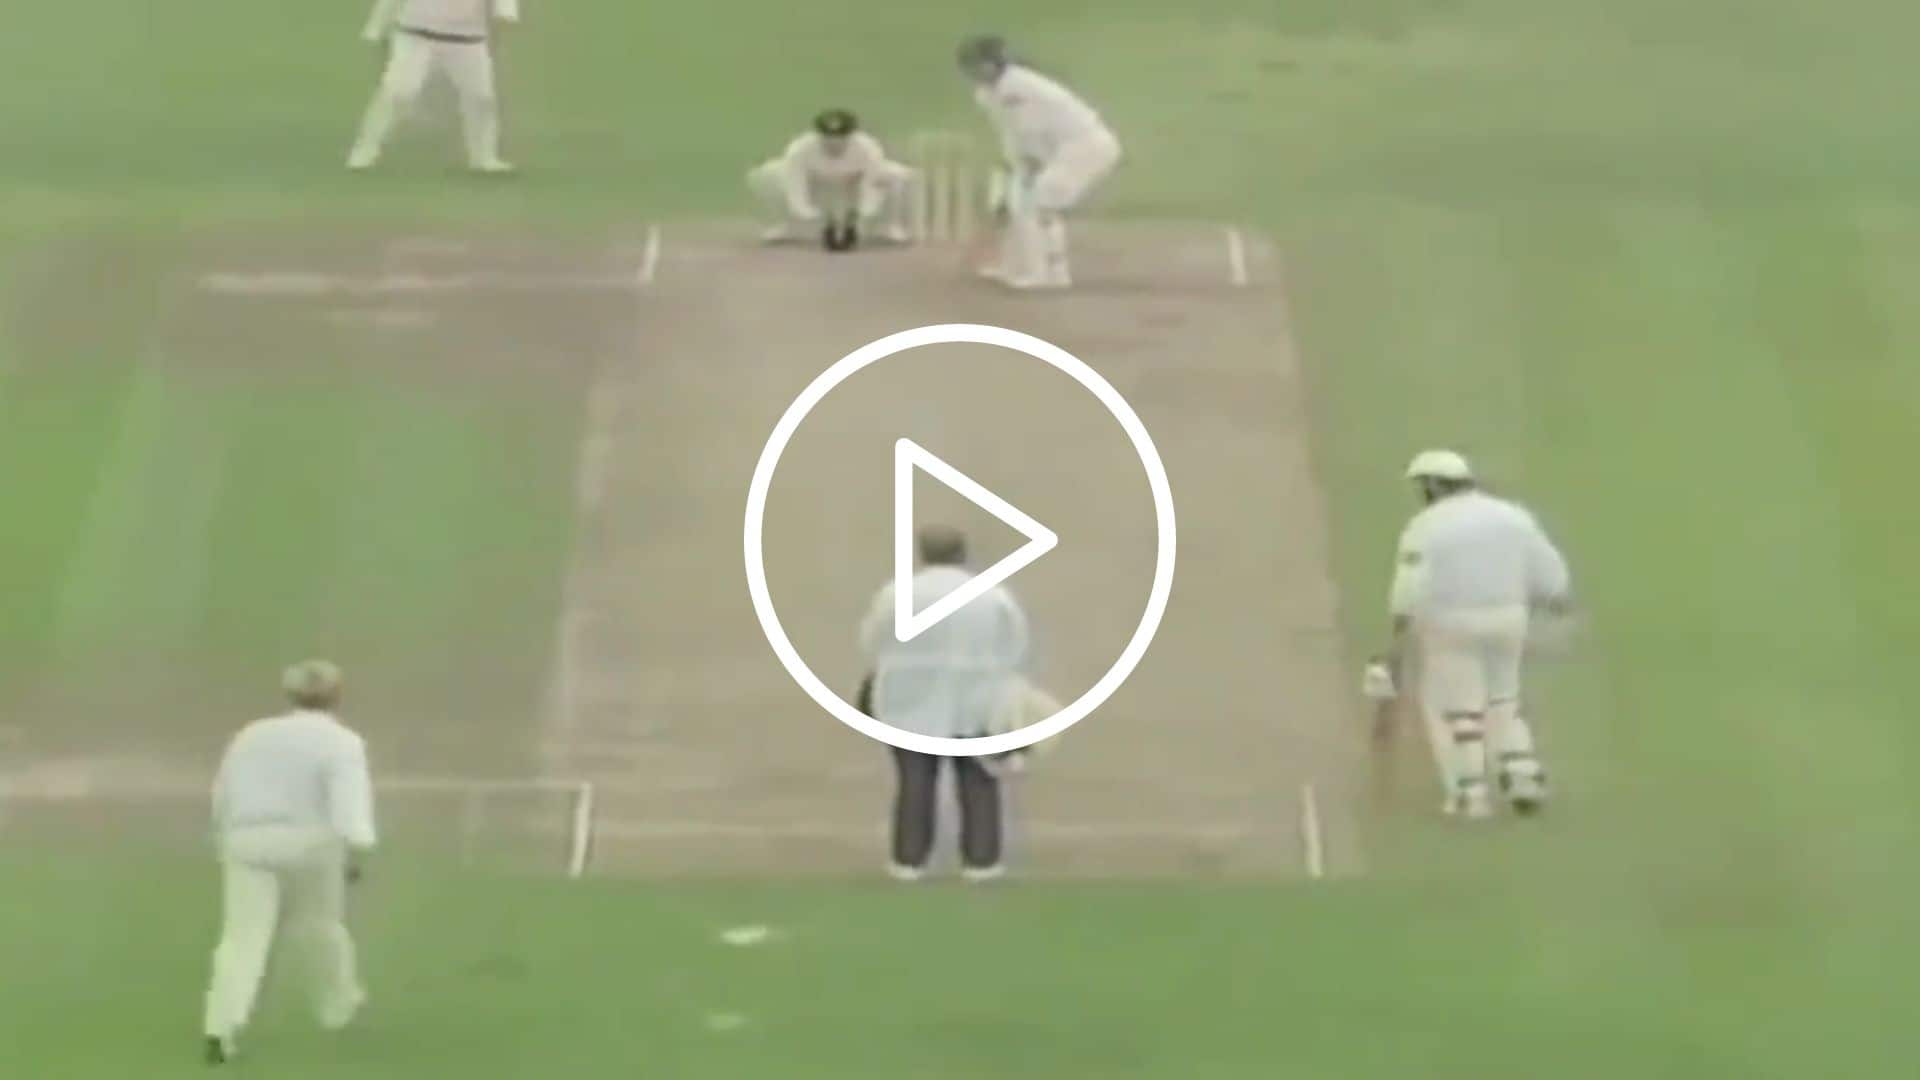 [Watch] When Shane Warne's Epic 'Ball Of The Century' Announced His Arrival On Big Stage